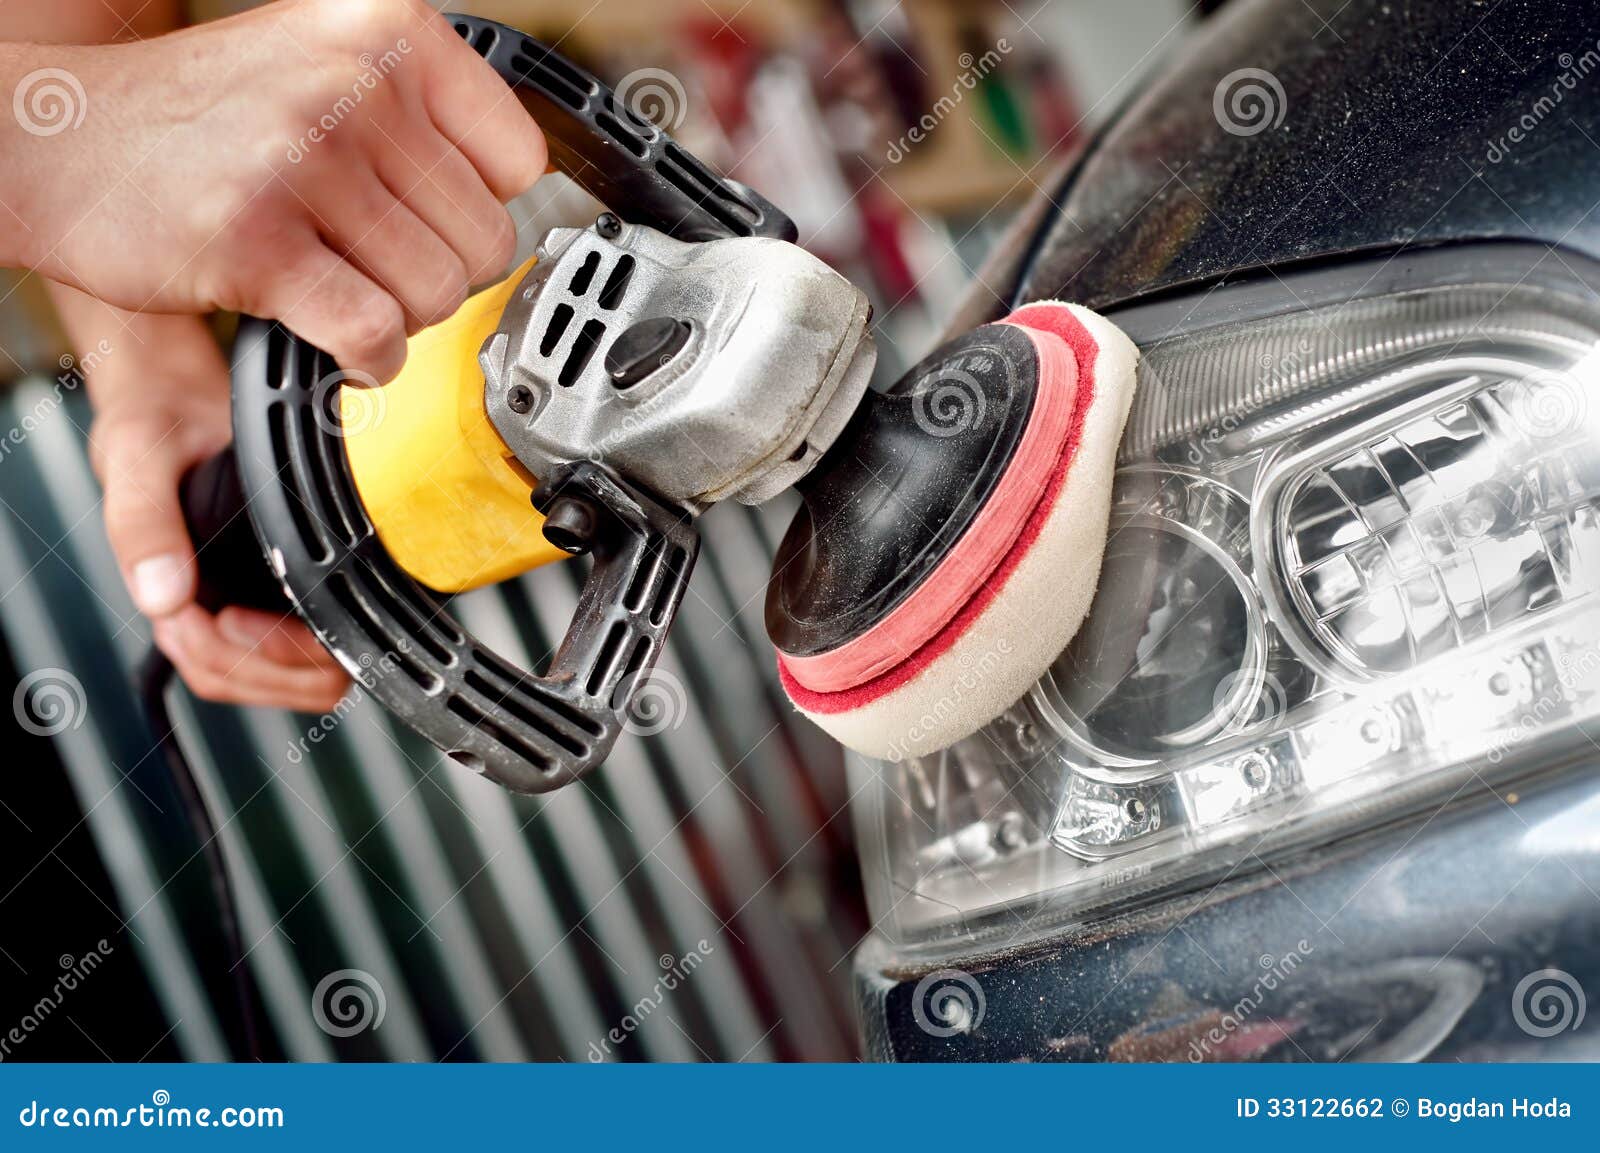 car headlight cleaning with power buffer machine